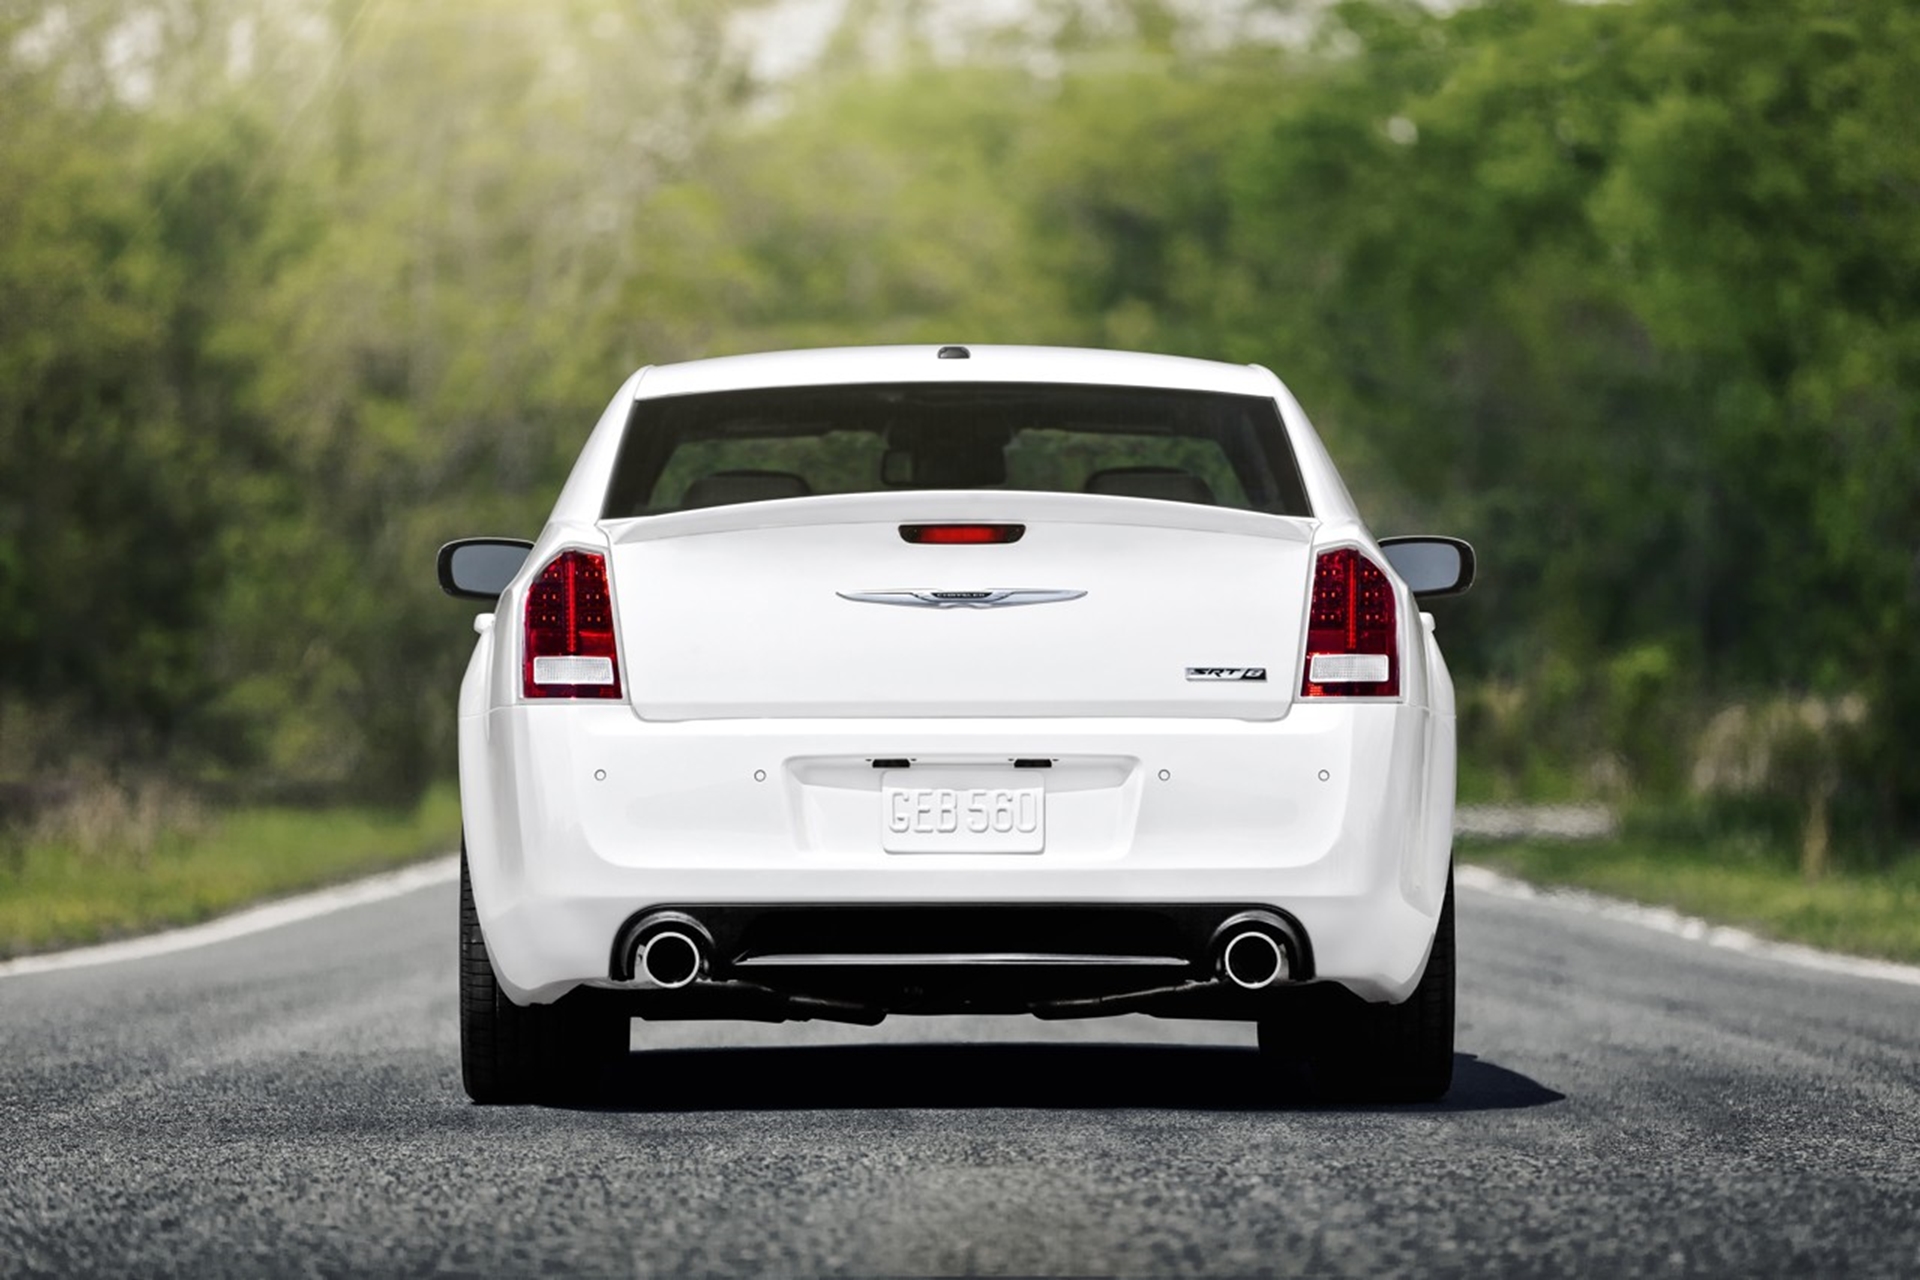 2012 Chrysler 300 SRT8 Offers the Ultimate Combination Of World-Class Luxury and Performance